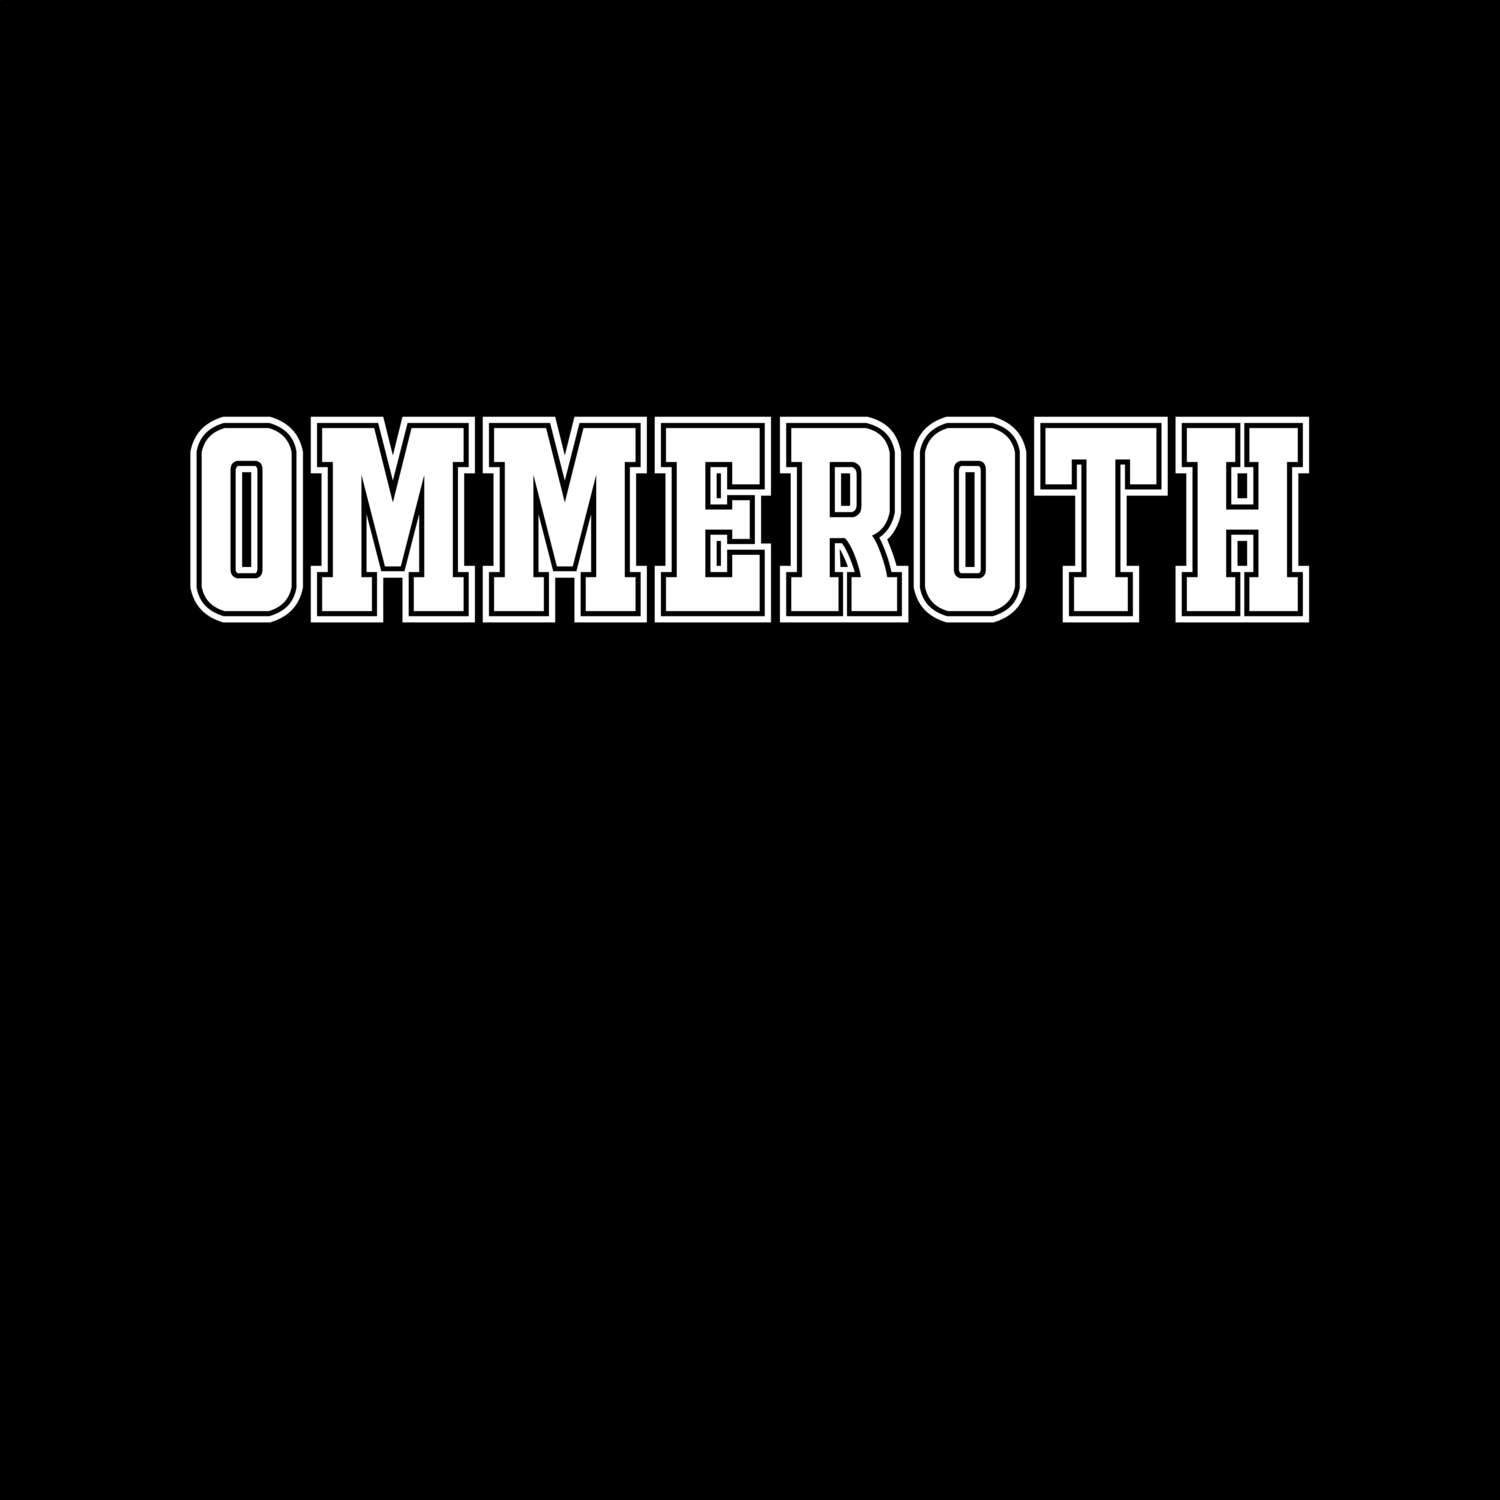 Ommeroth T-Shirt »Classic«